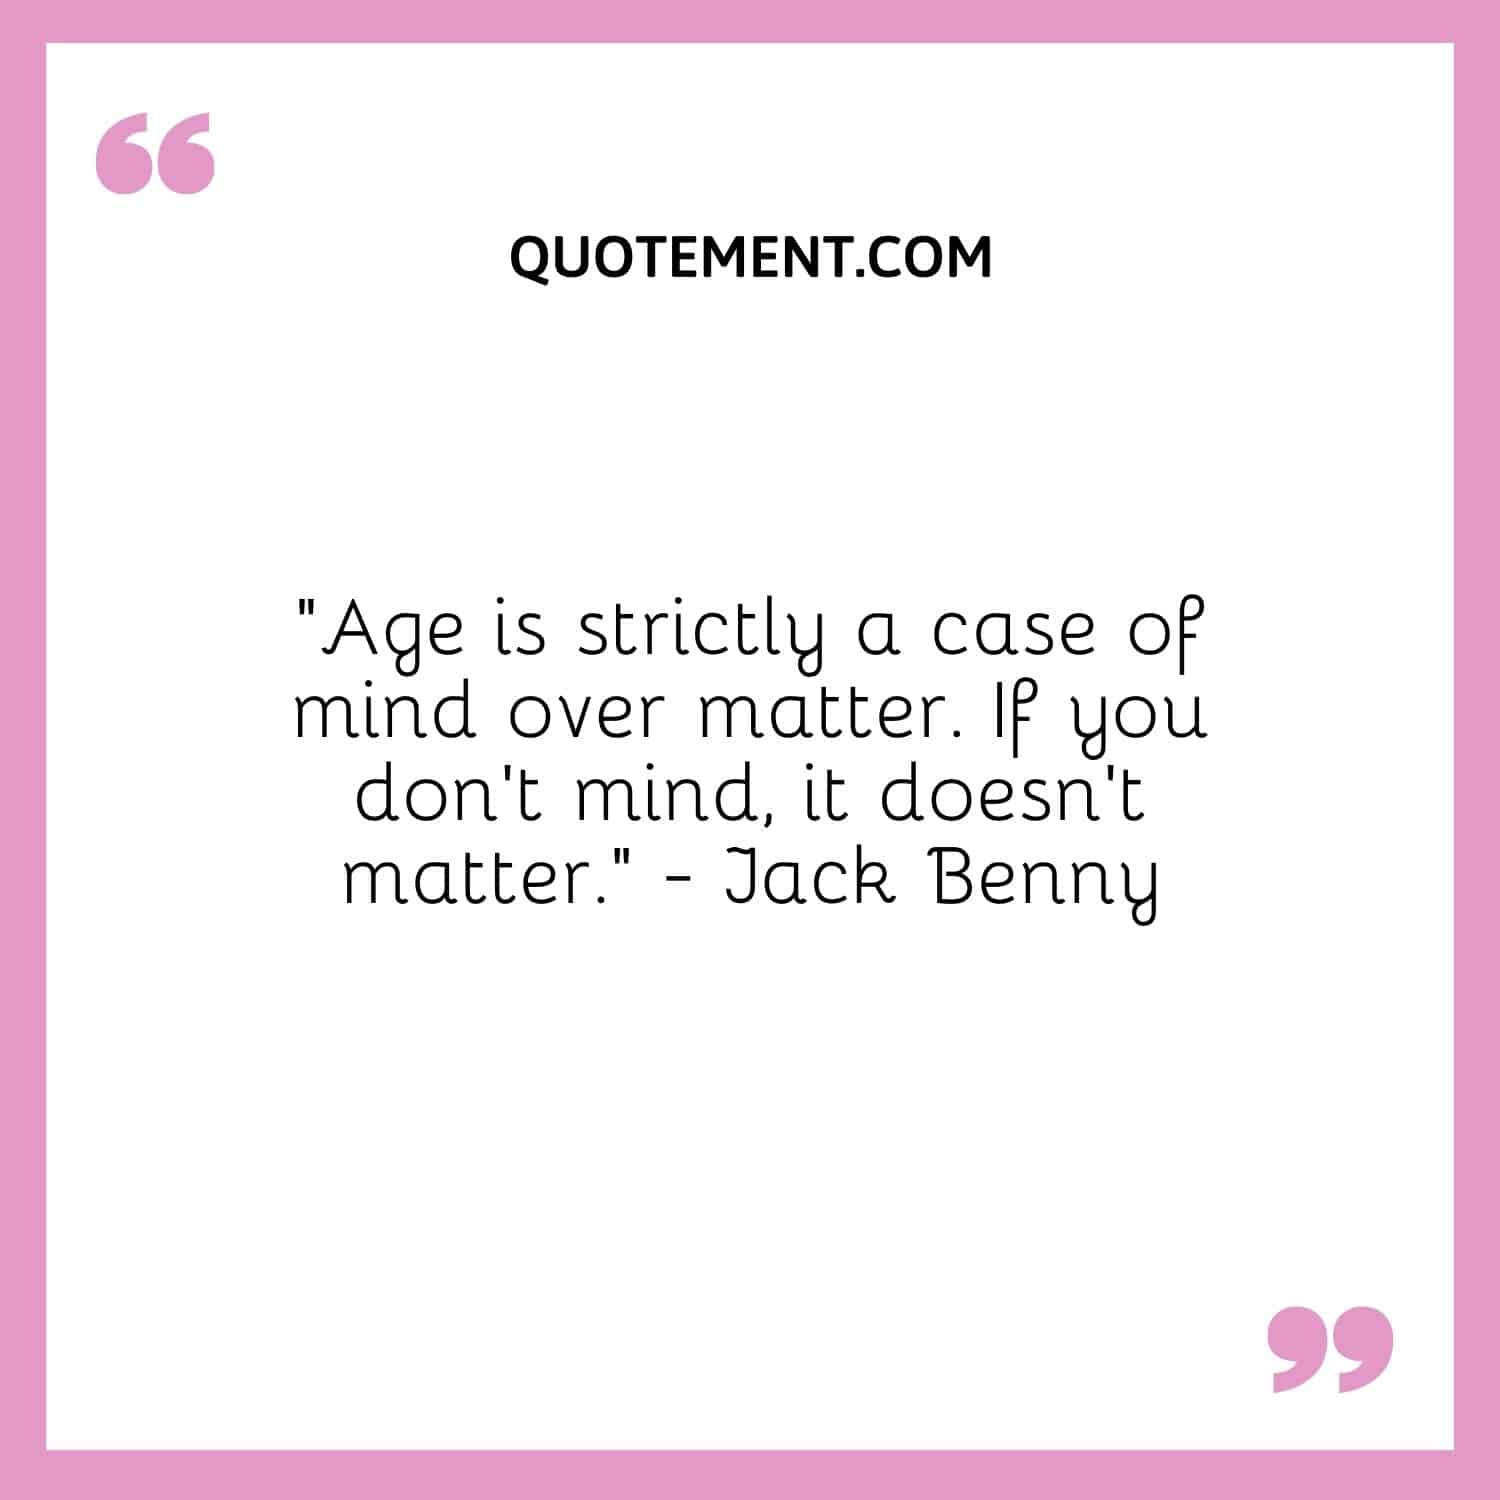 “Age is strictly a case of mind over matter. If you don’t mind, it doesn’t matter.” — Jack Benny